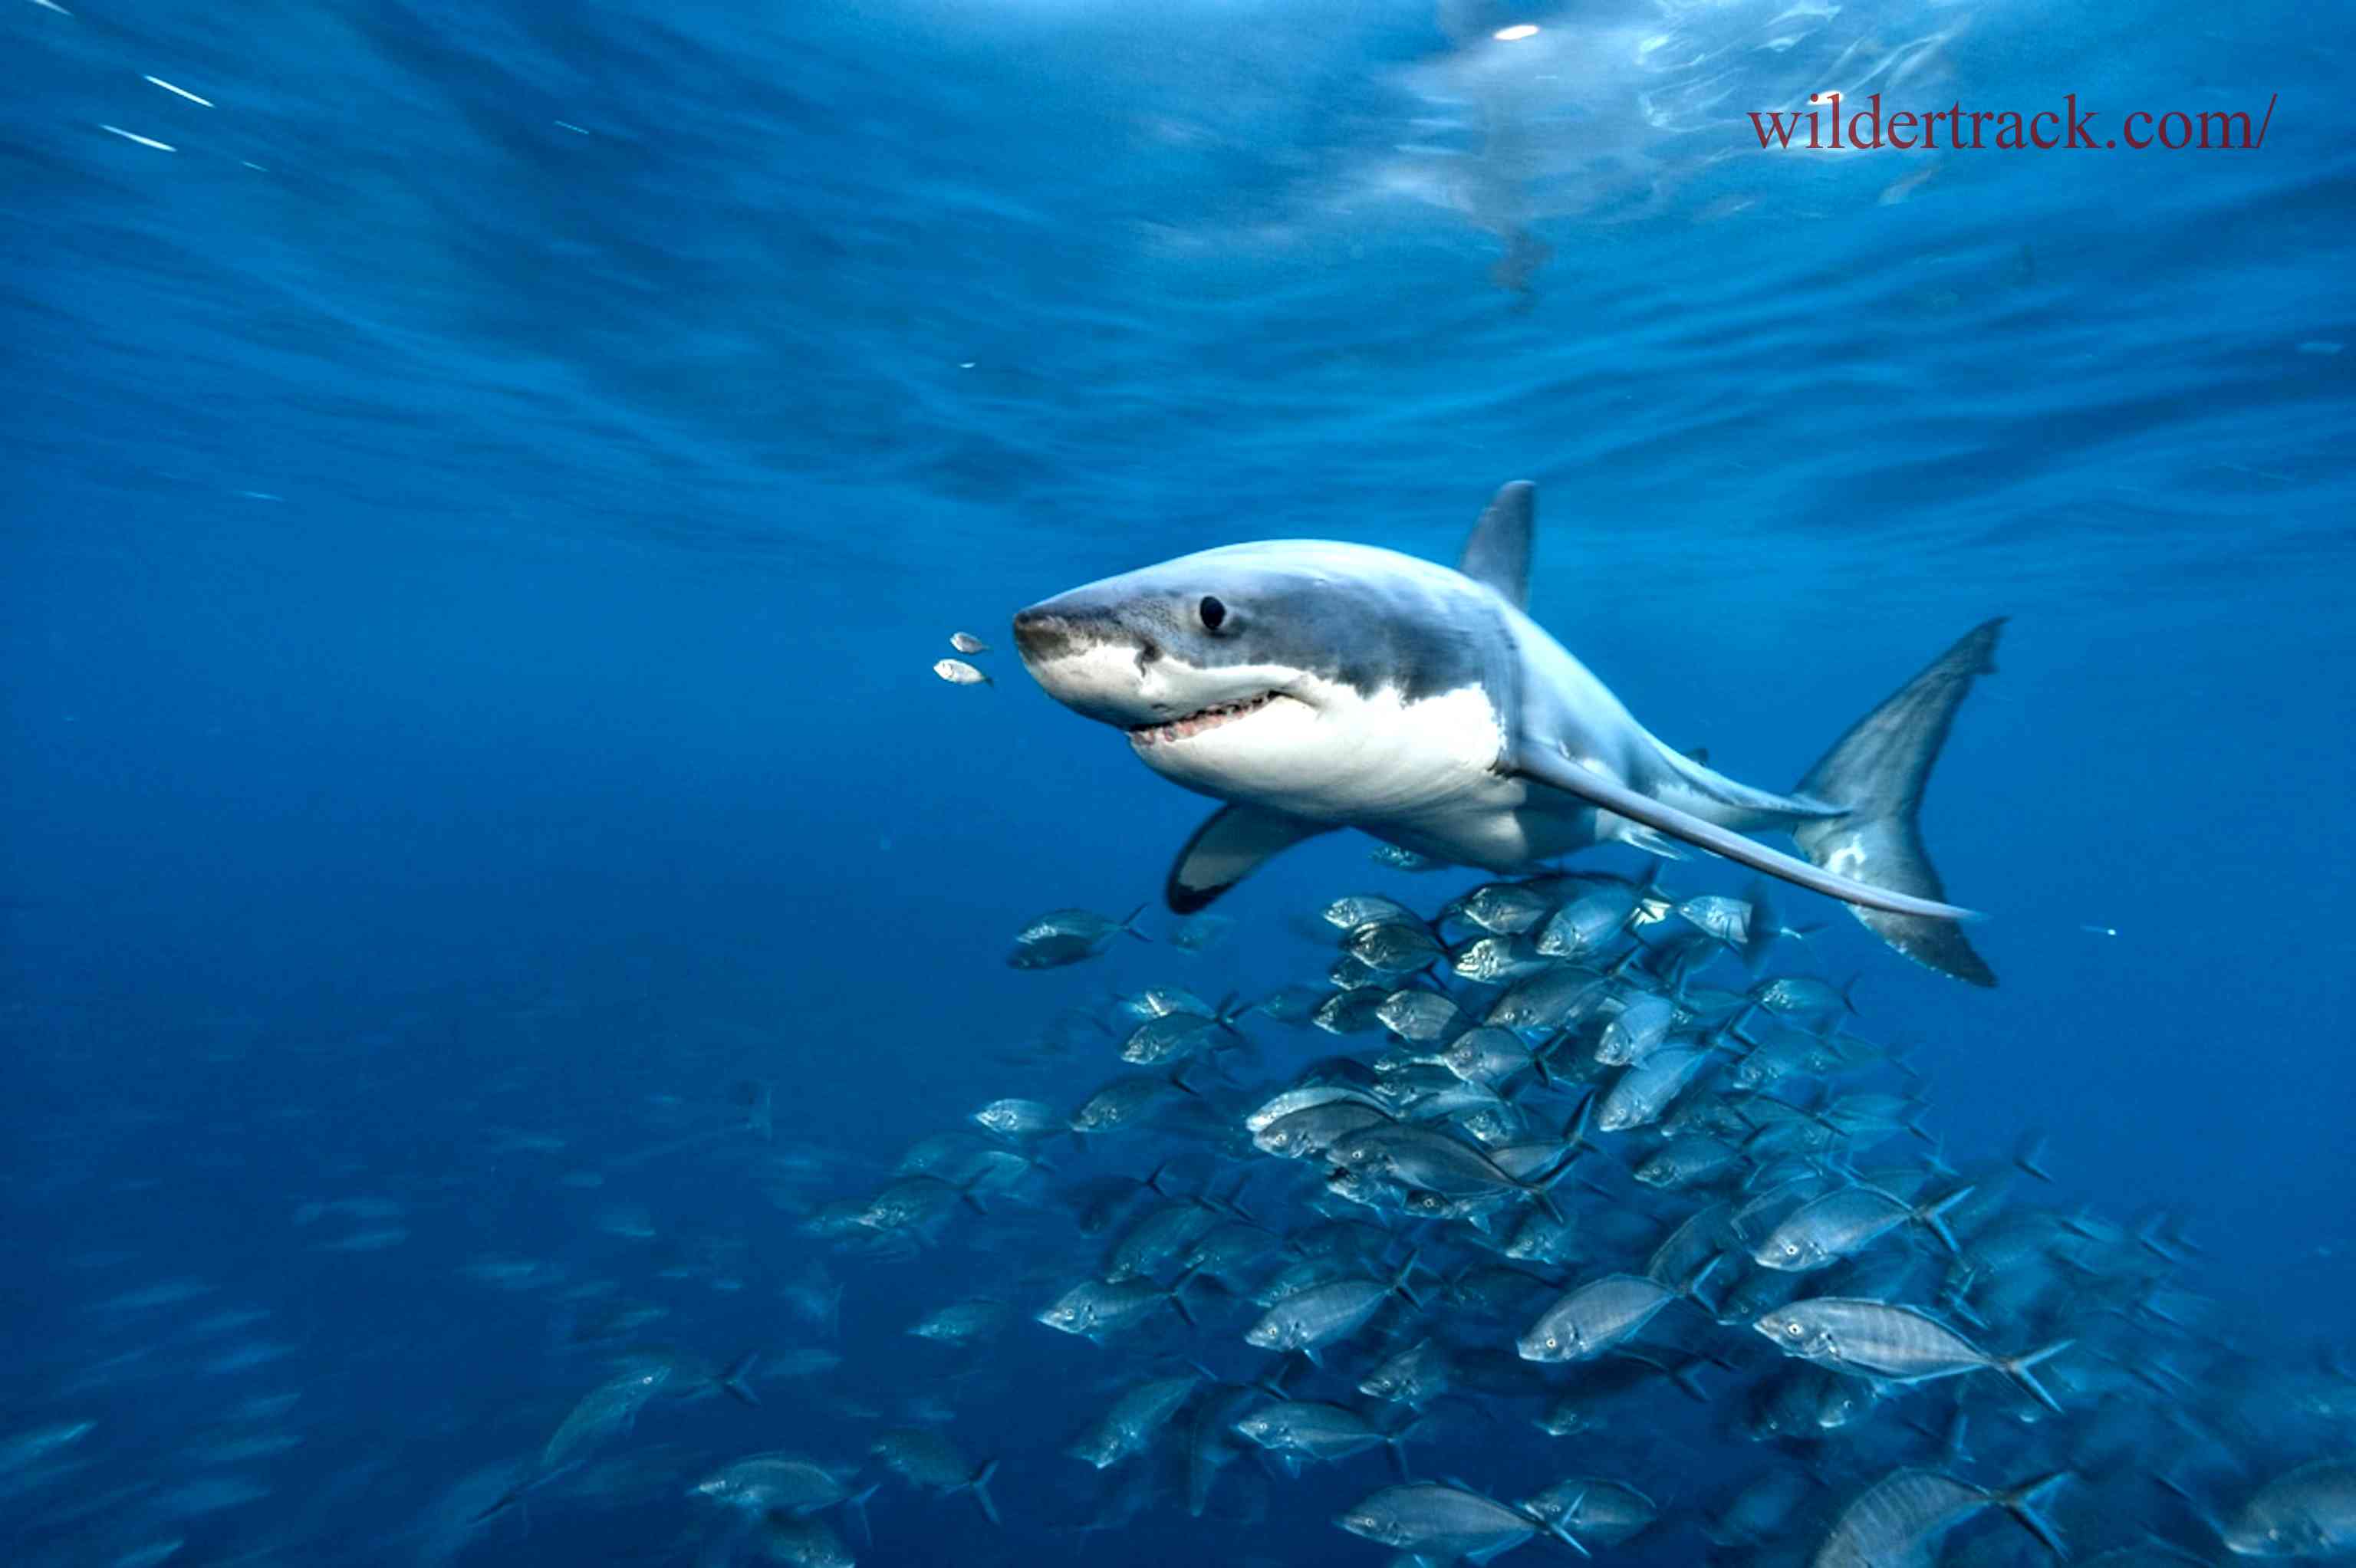 What is a Great White Shark?